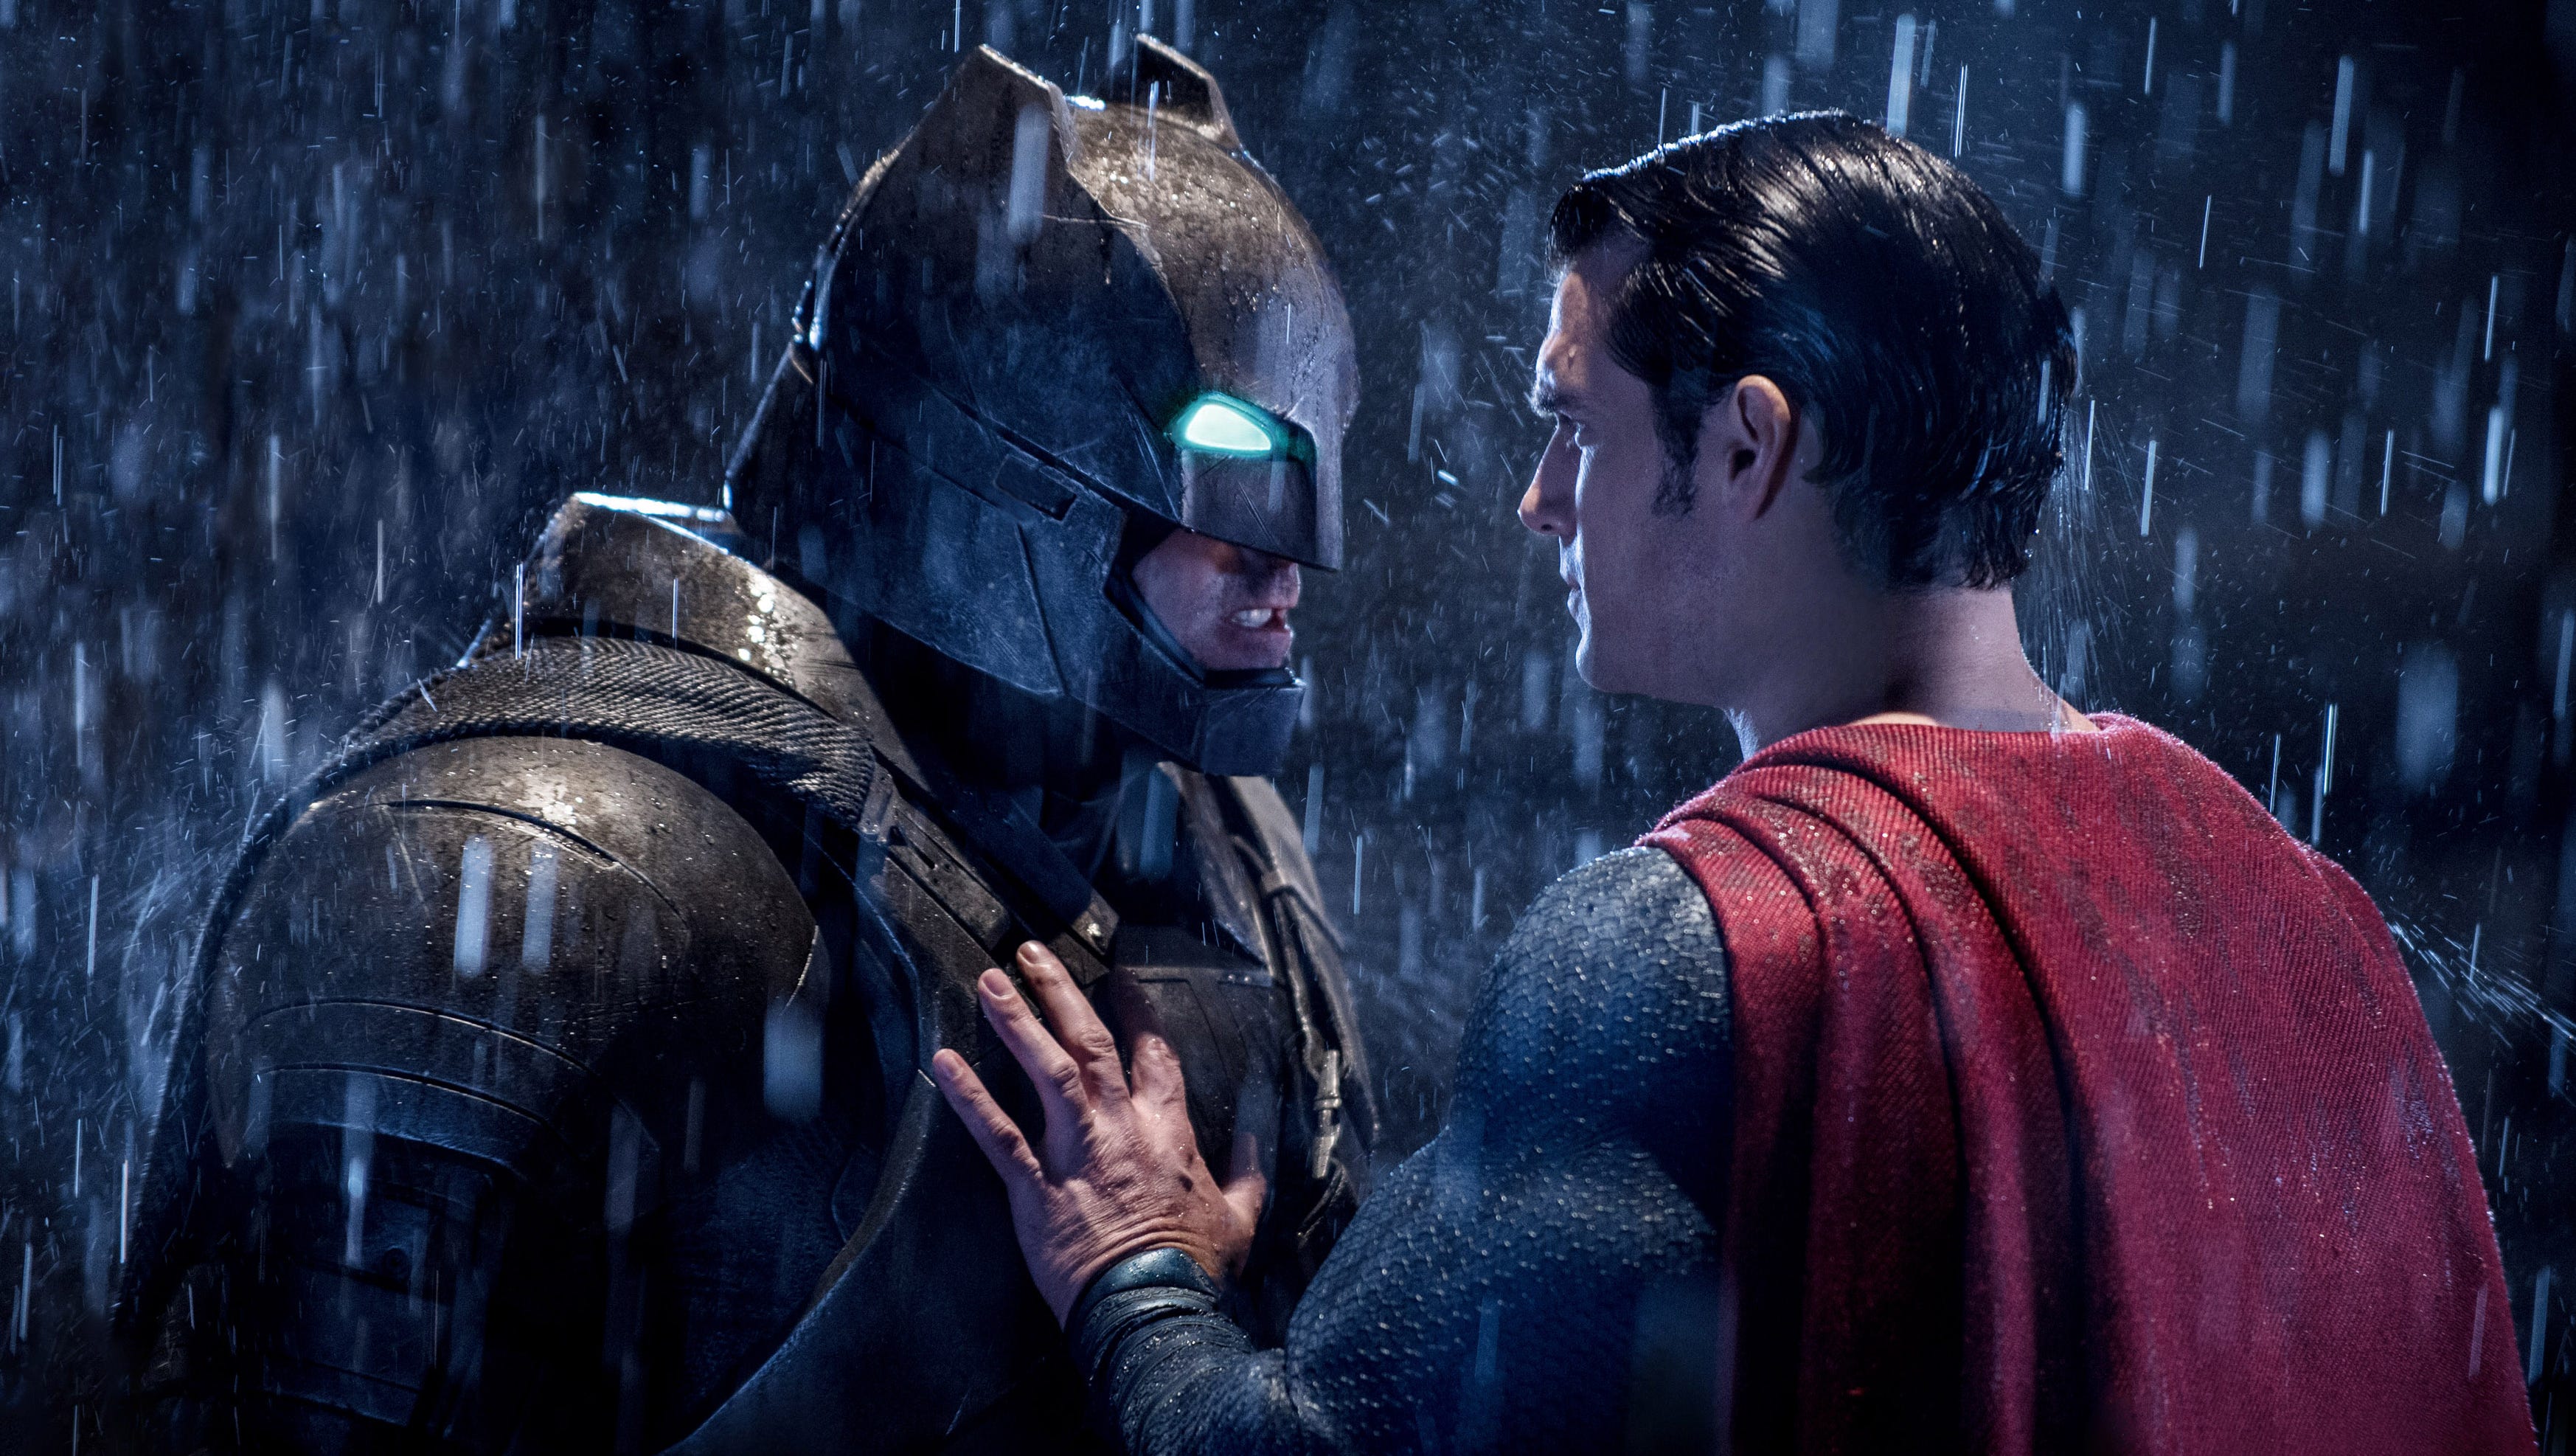 How much box-office punch will 'Batman v Superman' have?